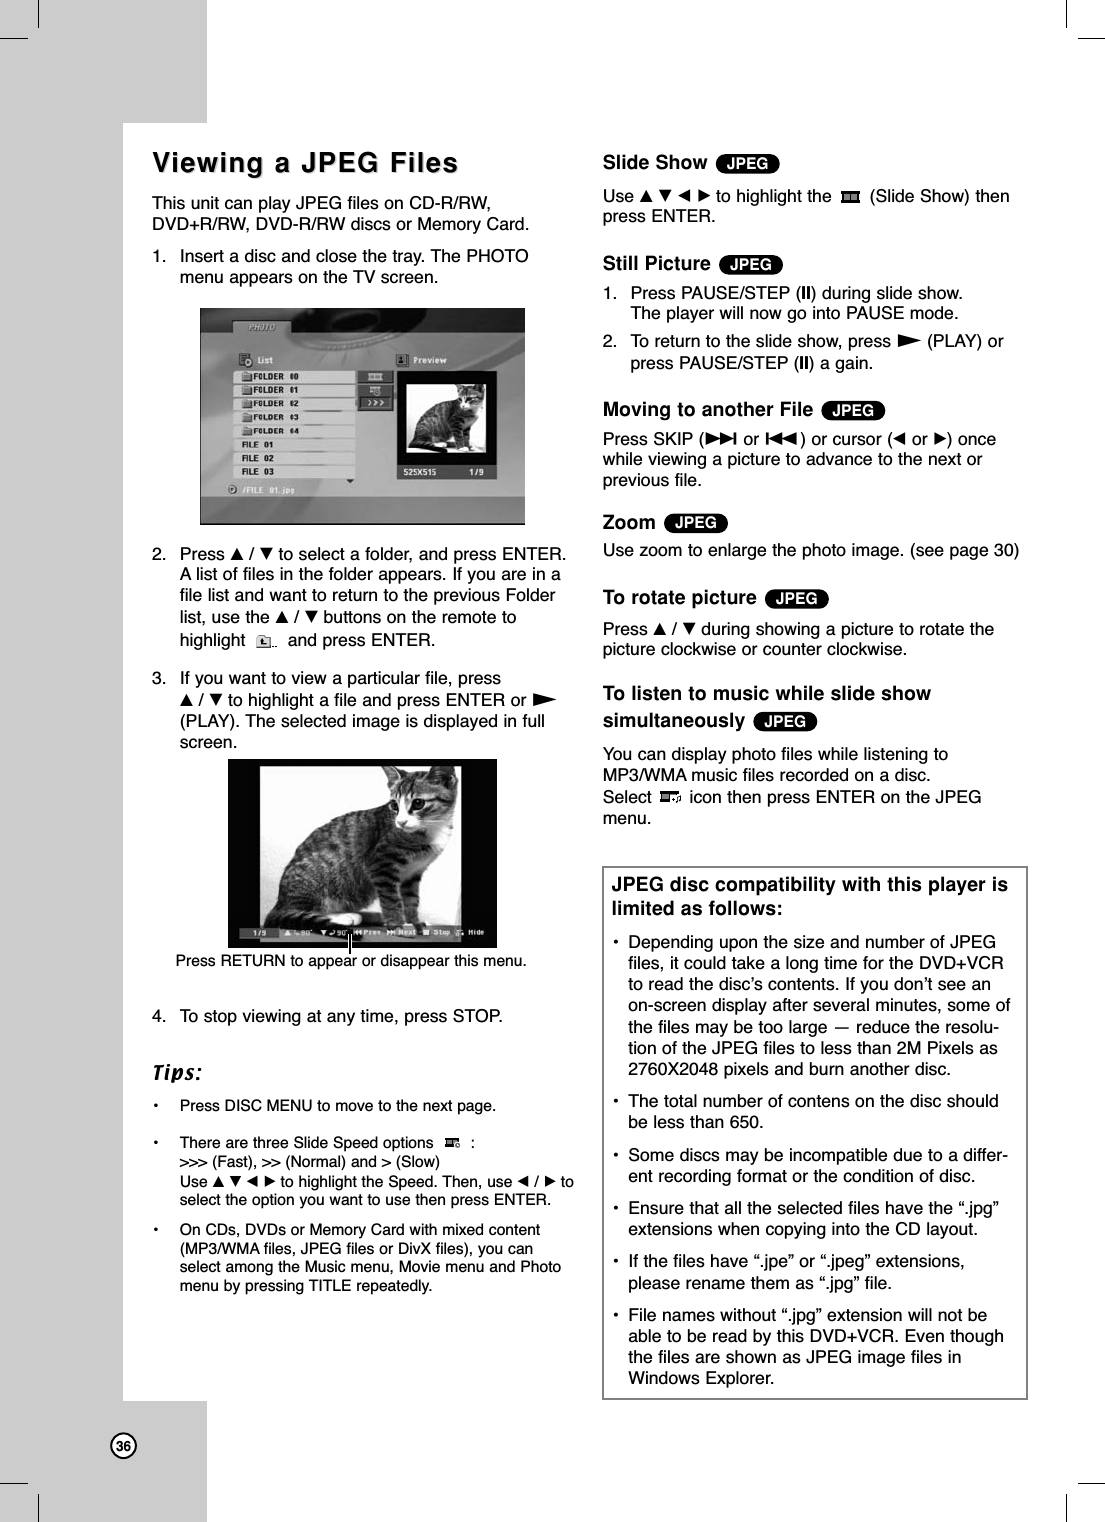 36VViewing a JPEG Filesiewing a JPEG FilesThis unit can play JPEG files on CD-R/RW,DVD+R/RW, DVD-R/RW discs or Memory Card. 1. Insert a disc and close the tray. The PHOTOmenu appears on the TV screen.2. Press v/Vto select a folder, and press ENTER.A list of files in the folder appears. If you are in afile list and want to return to the previous Folderlist, use the v/Vbuttons on the remote tohighlight  and press ENTER.3. If you want to view a particular file, press v/Vto highlight a file and press ENTER or N(PLAY). The selected image is displayed in fullscreen.4. To stop viewing at any time, press STOP.Tips:• Press DISC MENU to move to the next page.• There are three Slide Speed options  : &gt;&gt;&gt; (Fast), &gt;&gt; (Normal) and &gt; (Slow) Use vVbBto highlight the Speed. Then, use b/Btoselect the option you want to use then press ENTER. • On CDs, DVDs or Memory Card with mixed content(MP3/WMA files, JPEG files or DivX files), you canselect among the Music menu, Movie menu and Photomenu by pressing TITLE repeatedly.Slide ShowUse vVbBto highlight the  (Slide Show) thenpress ENTER.Still Picture 1. Press PAUSE/STEP (X) during slide show. The player will now go into PAUSE mode. 2. To return to the slide show, press N(PLAY) orpress PAUSE/STEP (X) a gain.Moving to another FilePress SKIP (&gt; or .) or cursor (bor B) oncewhile viewing a picture to advance to the next or previous file.ZoomUse zoom to enlarge the photo image. (see page 30)To rotate picture Press v/Vduring showing a picture to rotate thepicture clockwise or counter clockwise.To listen to music while slide show simultaneouslyYou can display photo files while listening toMP3/WMA music files recorded on a disc.Select icon then press ENTER on the JPEGmenu.JPEGJPEGJPEGJPEGJPEGJPEGJPEG disc compatibility with this player islimited as follows:• Depending upon the size and number of JPEGfiles, it could take a long time for the DVD+VCRto read the disc’s contents. If you don’t see anon-screen display after several minutes, some ofthe files may be too large — reduce the resolu-tion of the JPEG files to less than 2M Pixels as2760X2048 pixels and burn another disc.• The total number of contens on the disc shouldbe less than 650.• Some discs may be incompatible due to a differ-ent recording format or the condition of disc.• Ensure that all the selected files have the “.jpg”extensions when copying into the CD layout.• If the files have “.jpe” or “.jpeg” extensions,please rename them as “.jpg” file.• File names without “.jpg” extension will not beable to be read by this DVD+VCR. Even thoughthe files are shown as JPEG image files inWindows Explorer.Press RETURN to appear or disappear this menu.